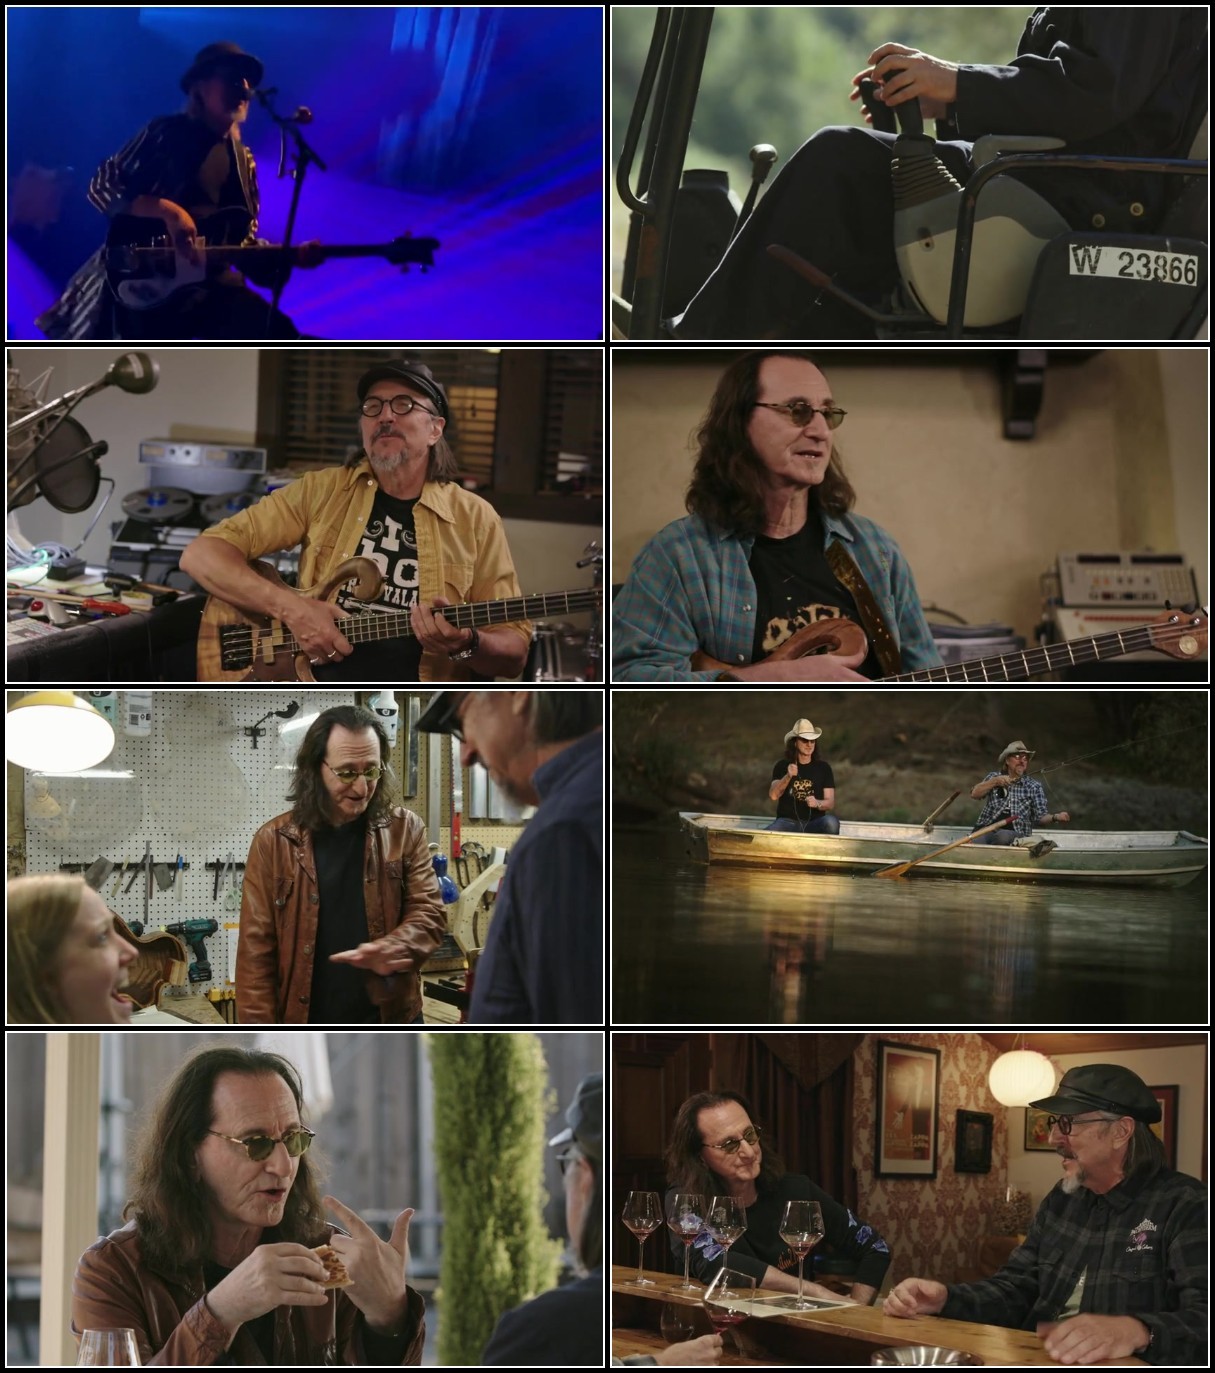 Geddy Lee Asks Are Bass Players Human Too S01E01 480p x264-RUBiK